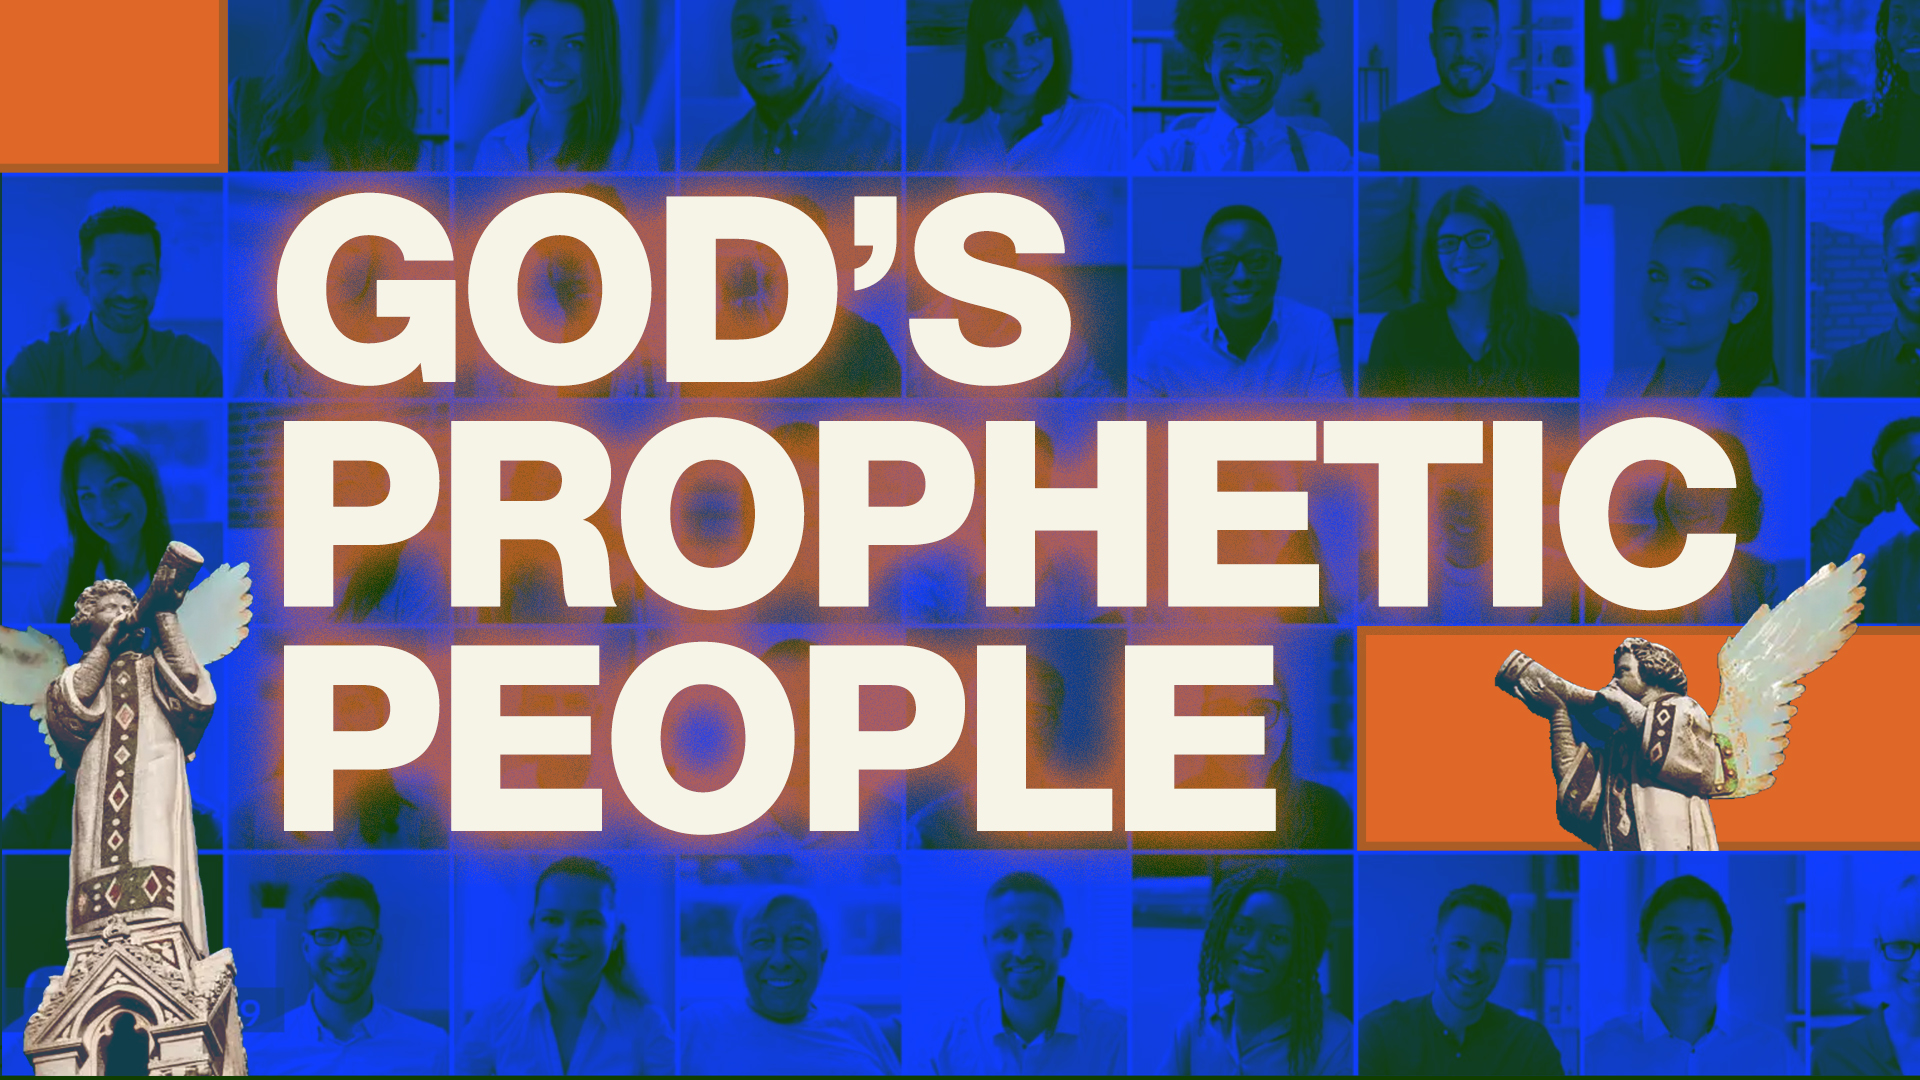 Photos of people in squares with the word ‘God’s Prophetic People’ overlaid